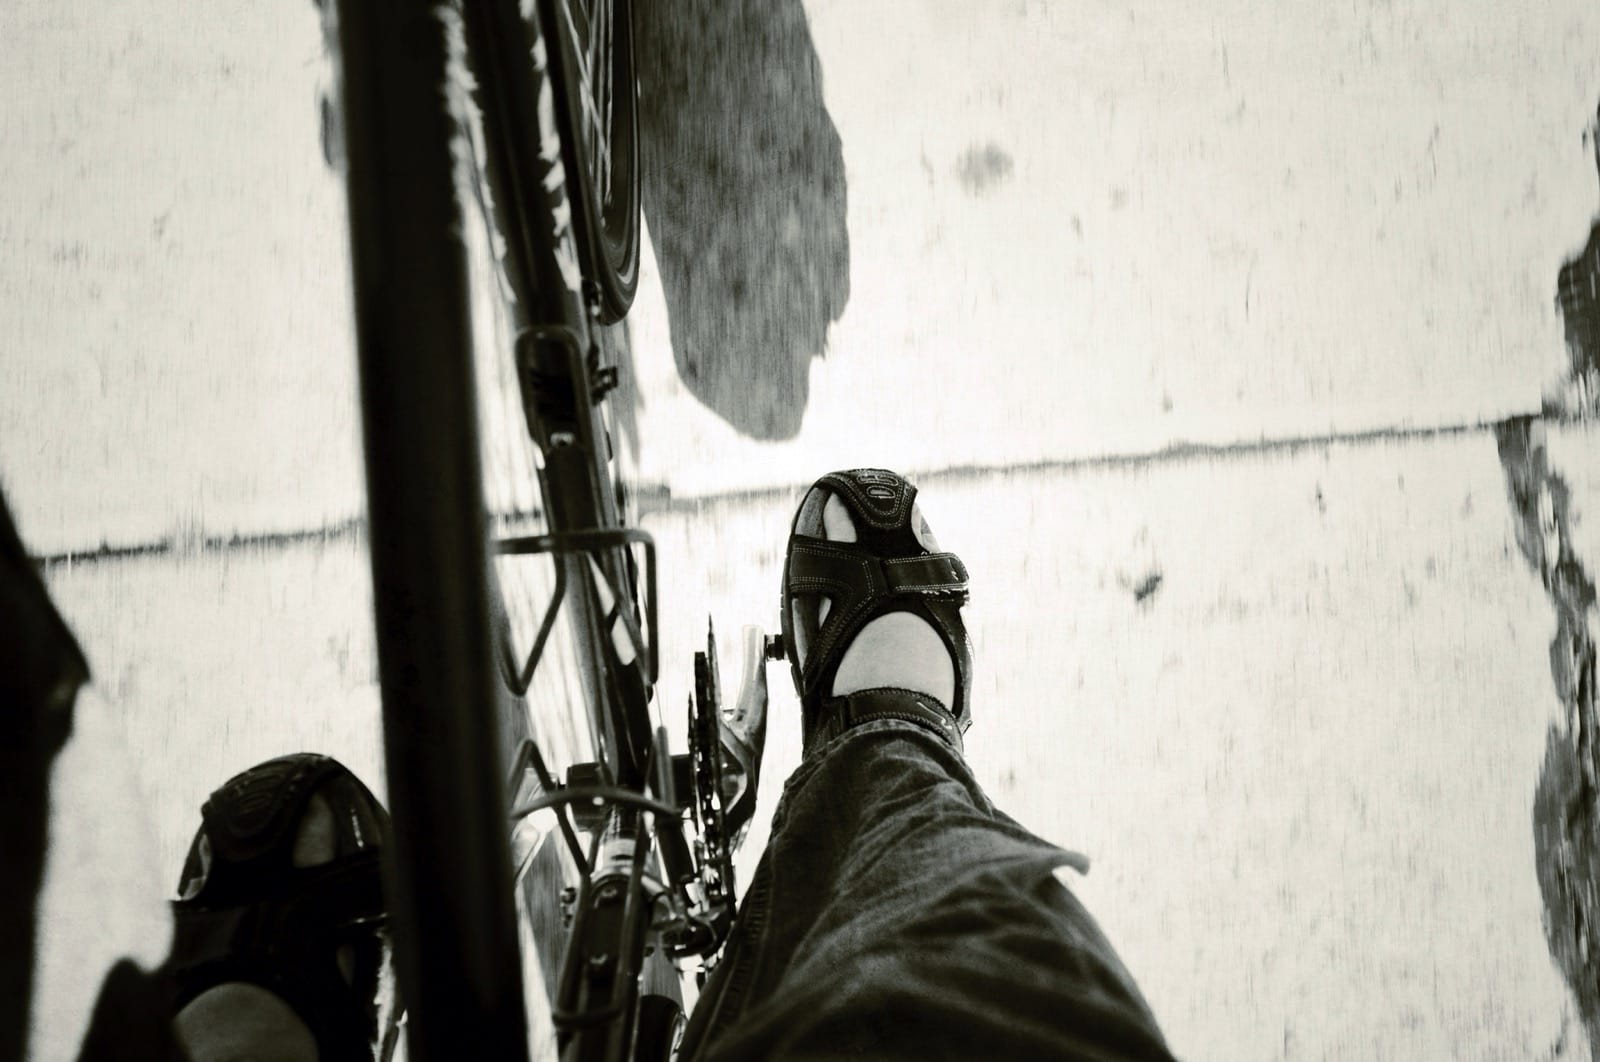 B&W photo of feet on a bicycle.